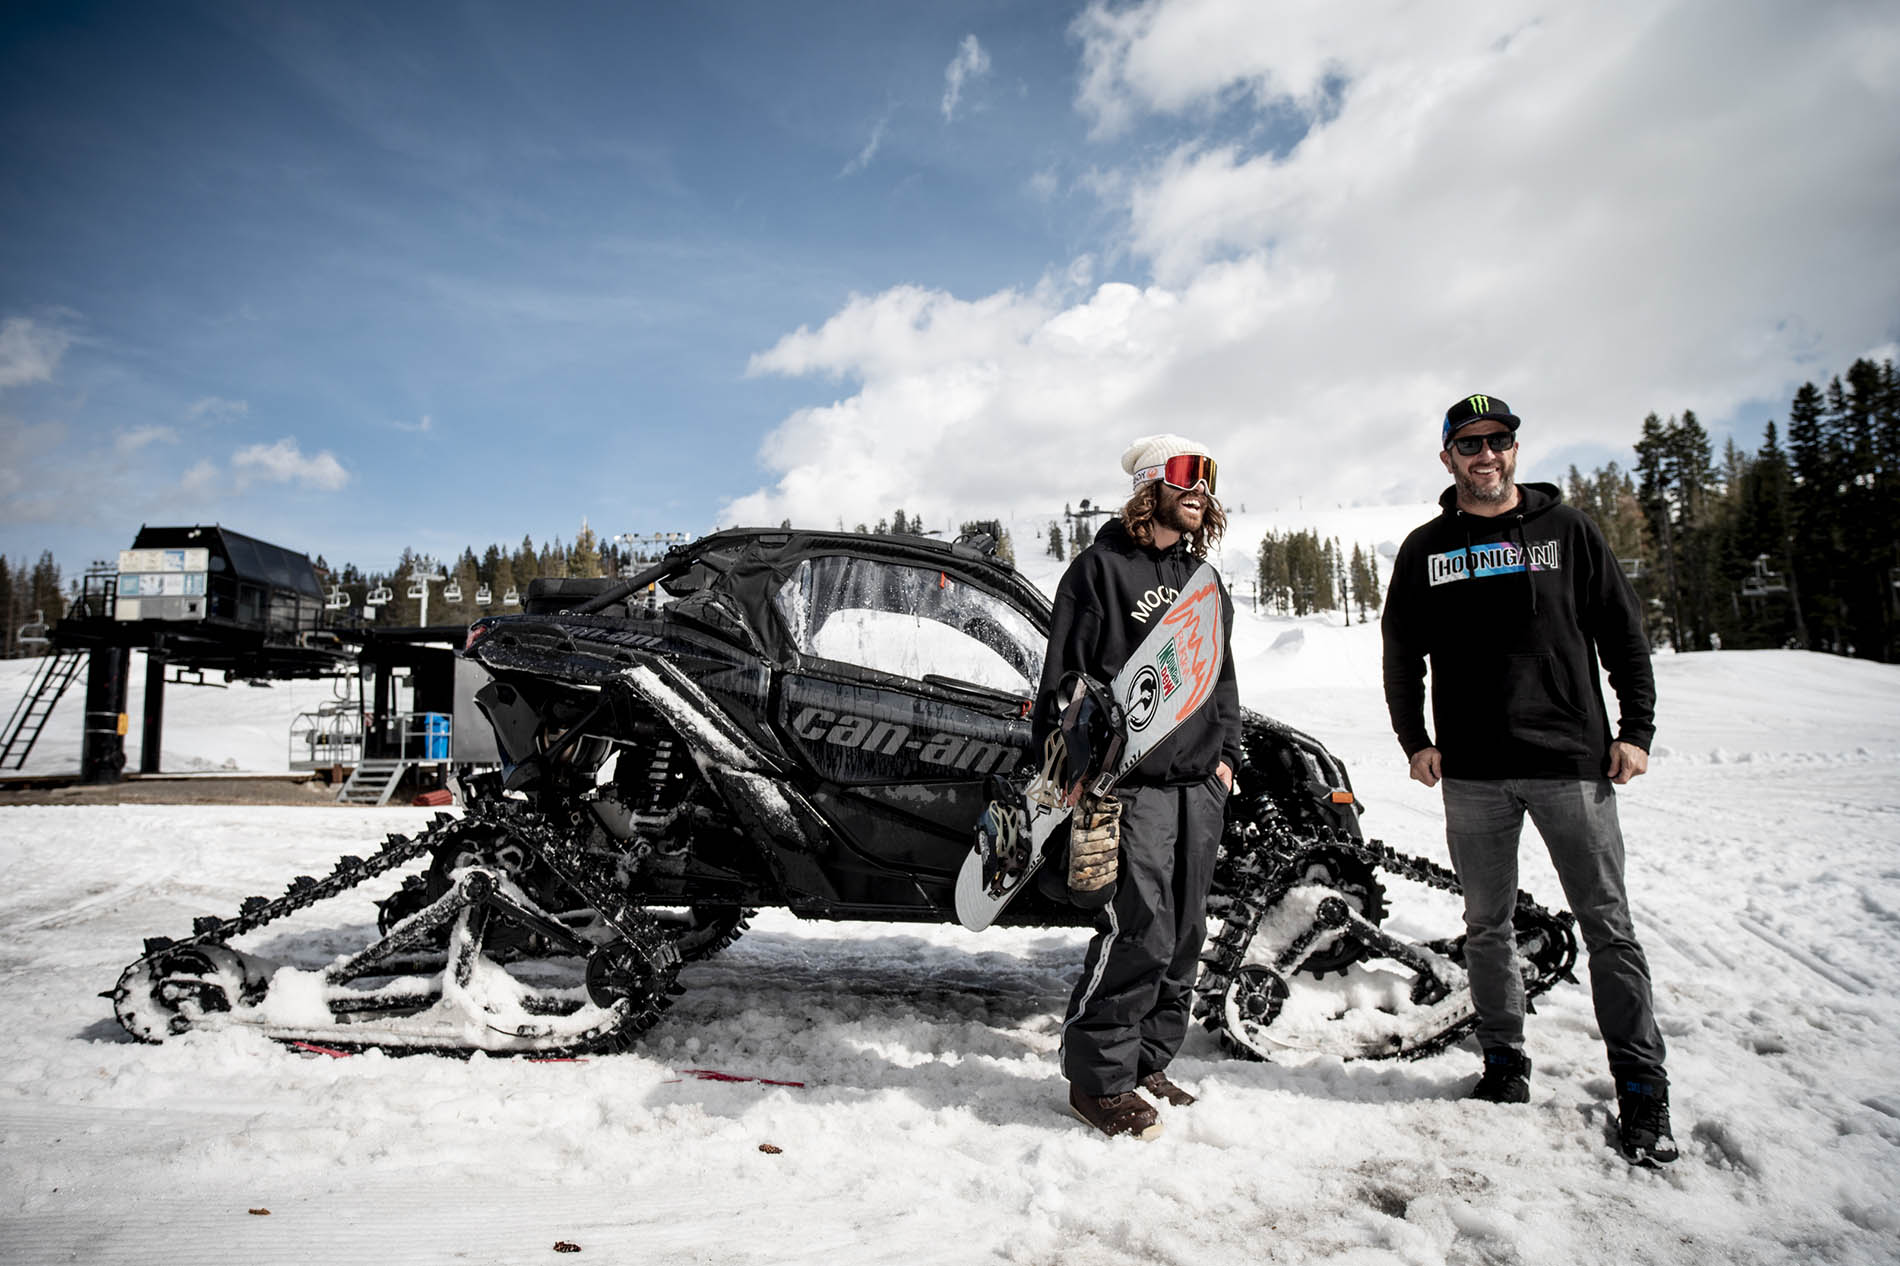 Ken Block Shreds A Mountain in his Can-Am on Tracks With Danny Davis!